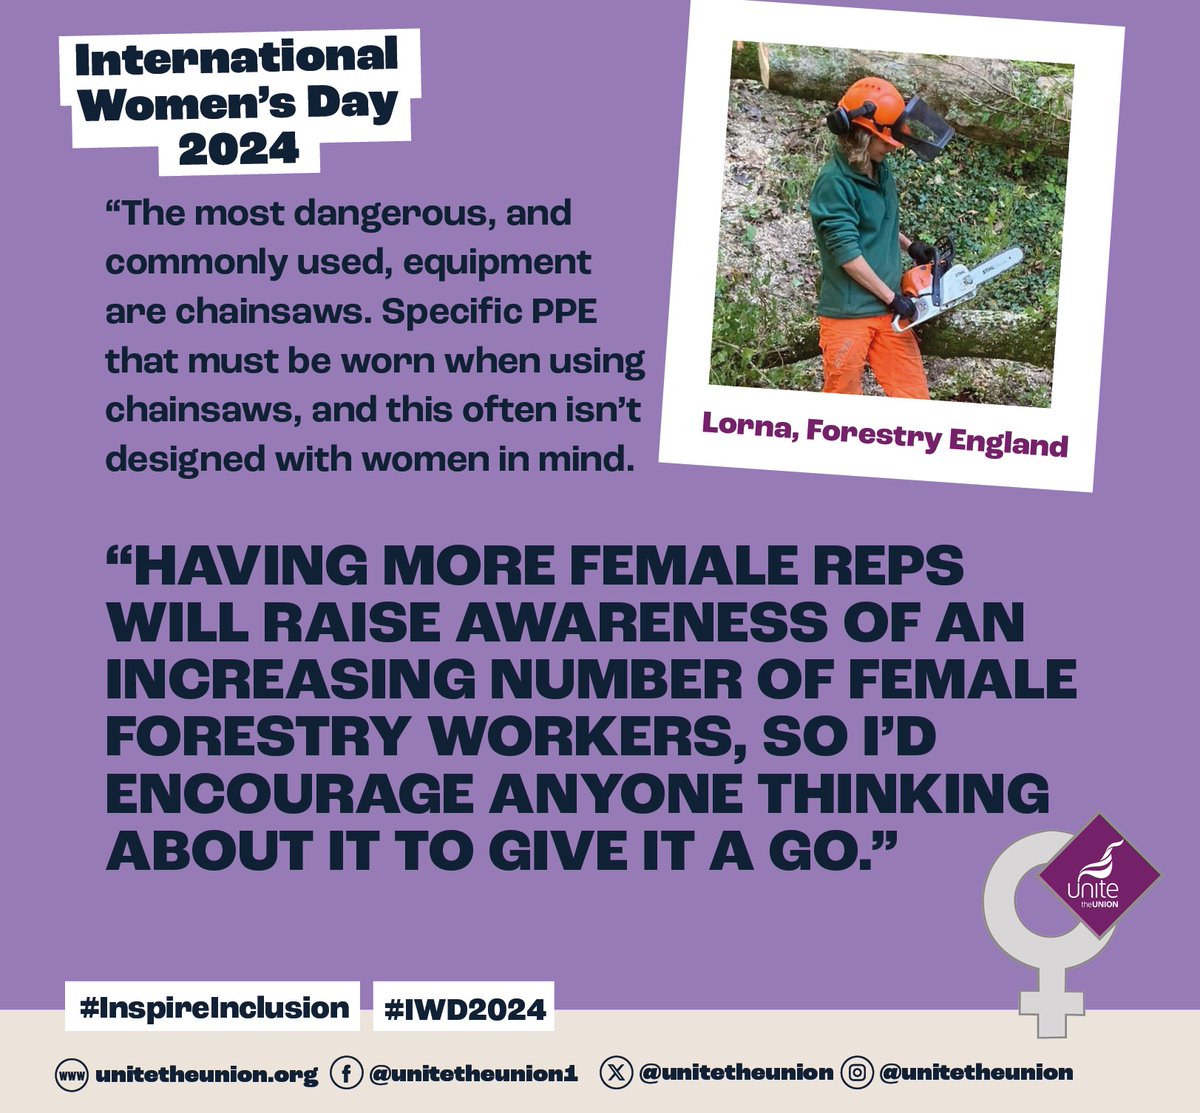 In the run up to International Women's Day 2024, Unite Live spotlights women making a workplace difference. Meet Lorna, representing women forestry workers. Read more: unitelive.org/lorna-branches… #IWD2024 #JobsPayConditions